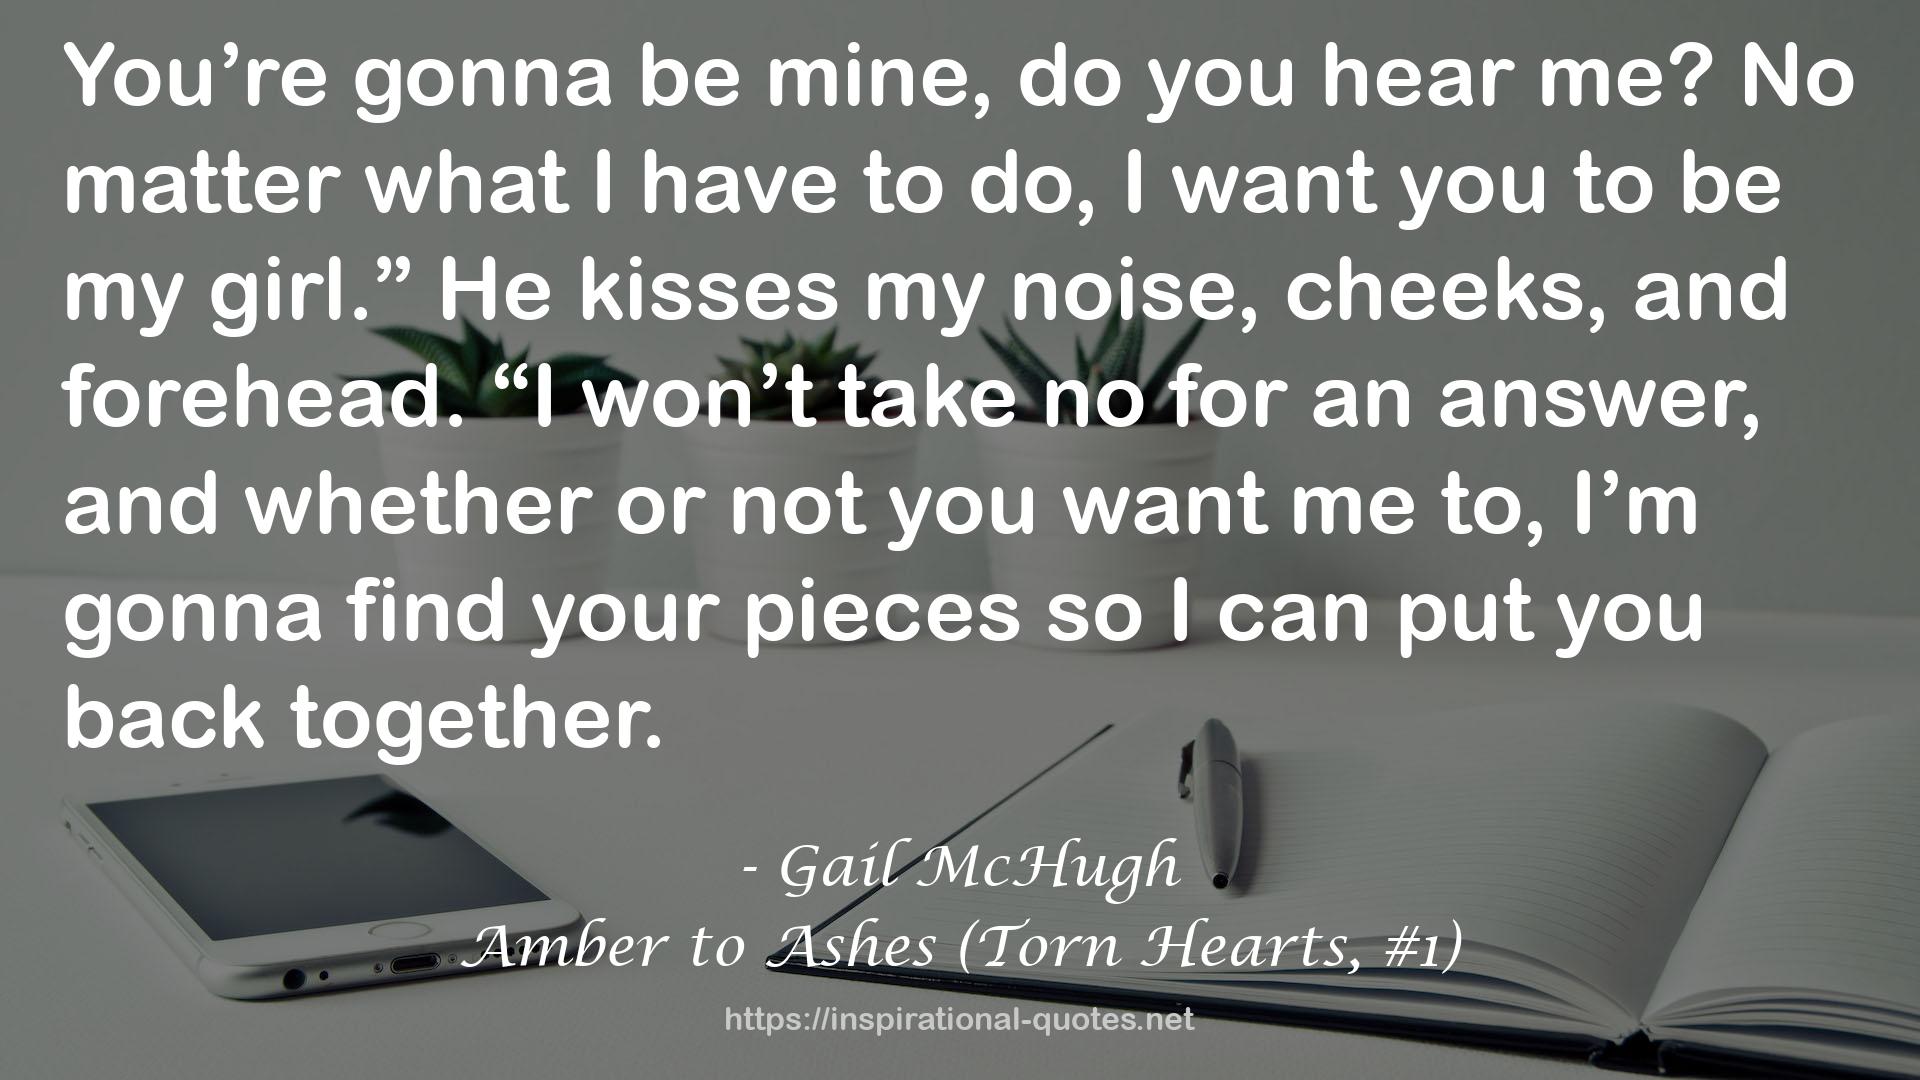 Amber to Ashes (Torn Hearts, #1) QUOTES